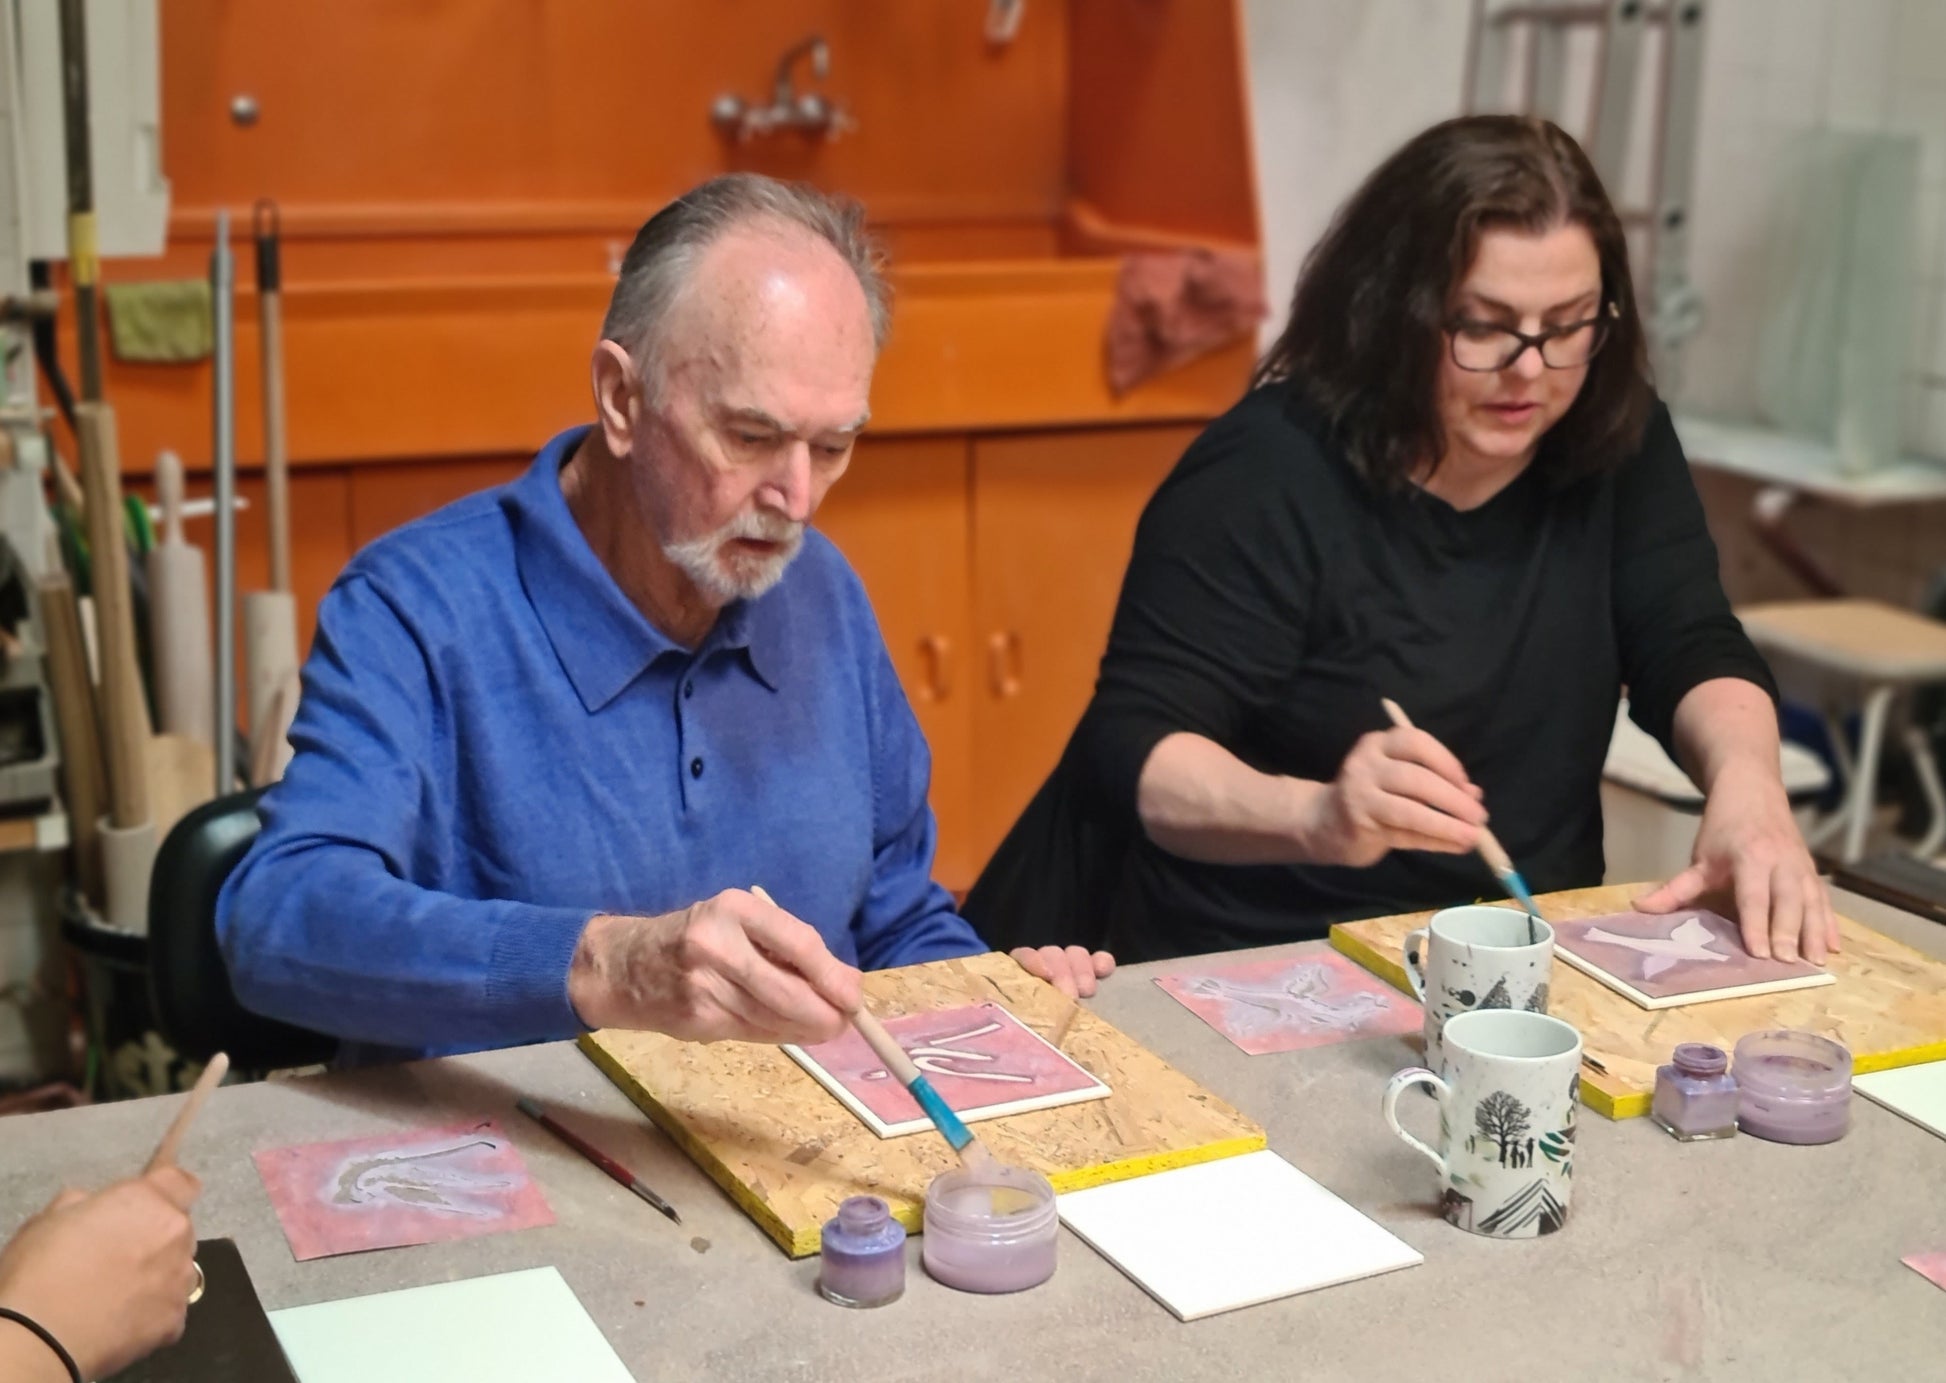 Porto Tiles and Tea Workshop with Francisco in Porto, Portugal by subcultours